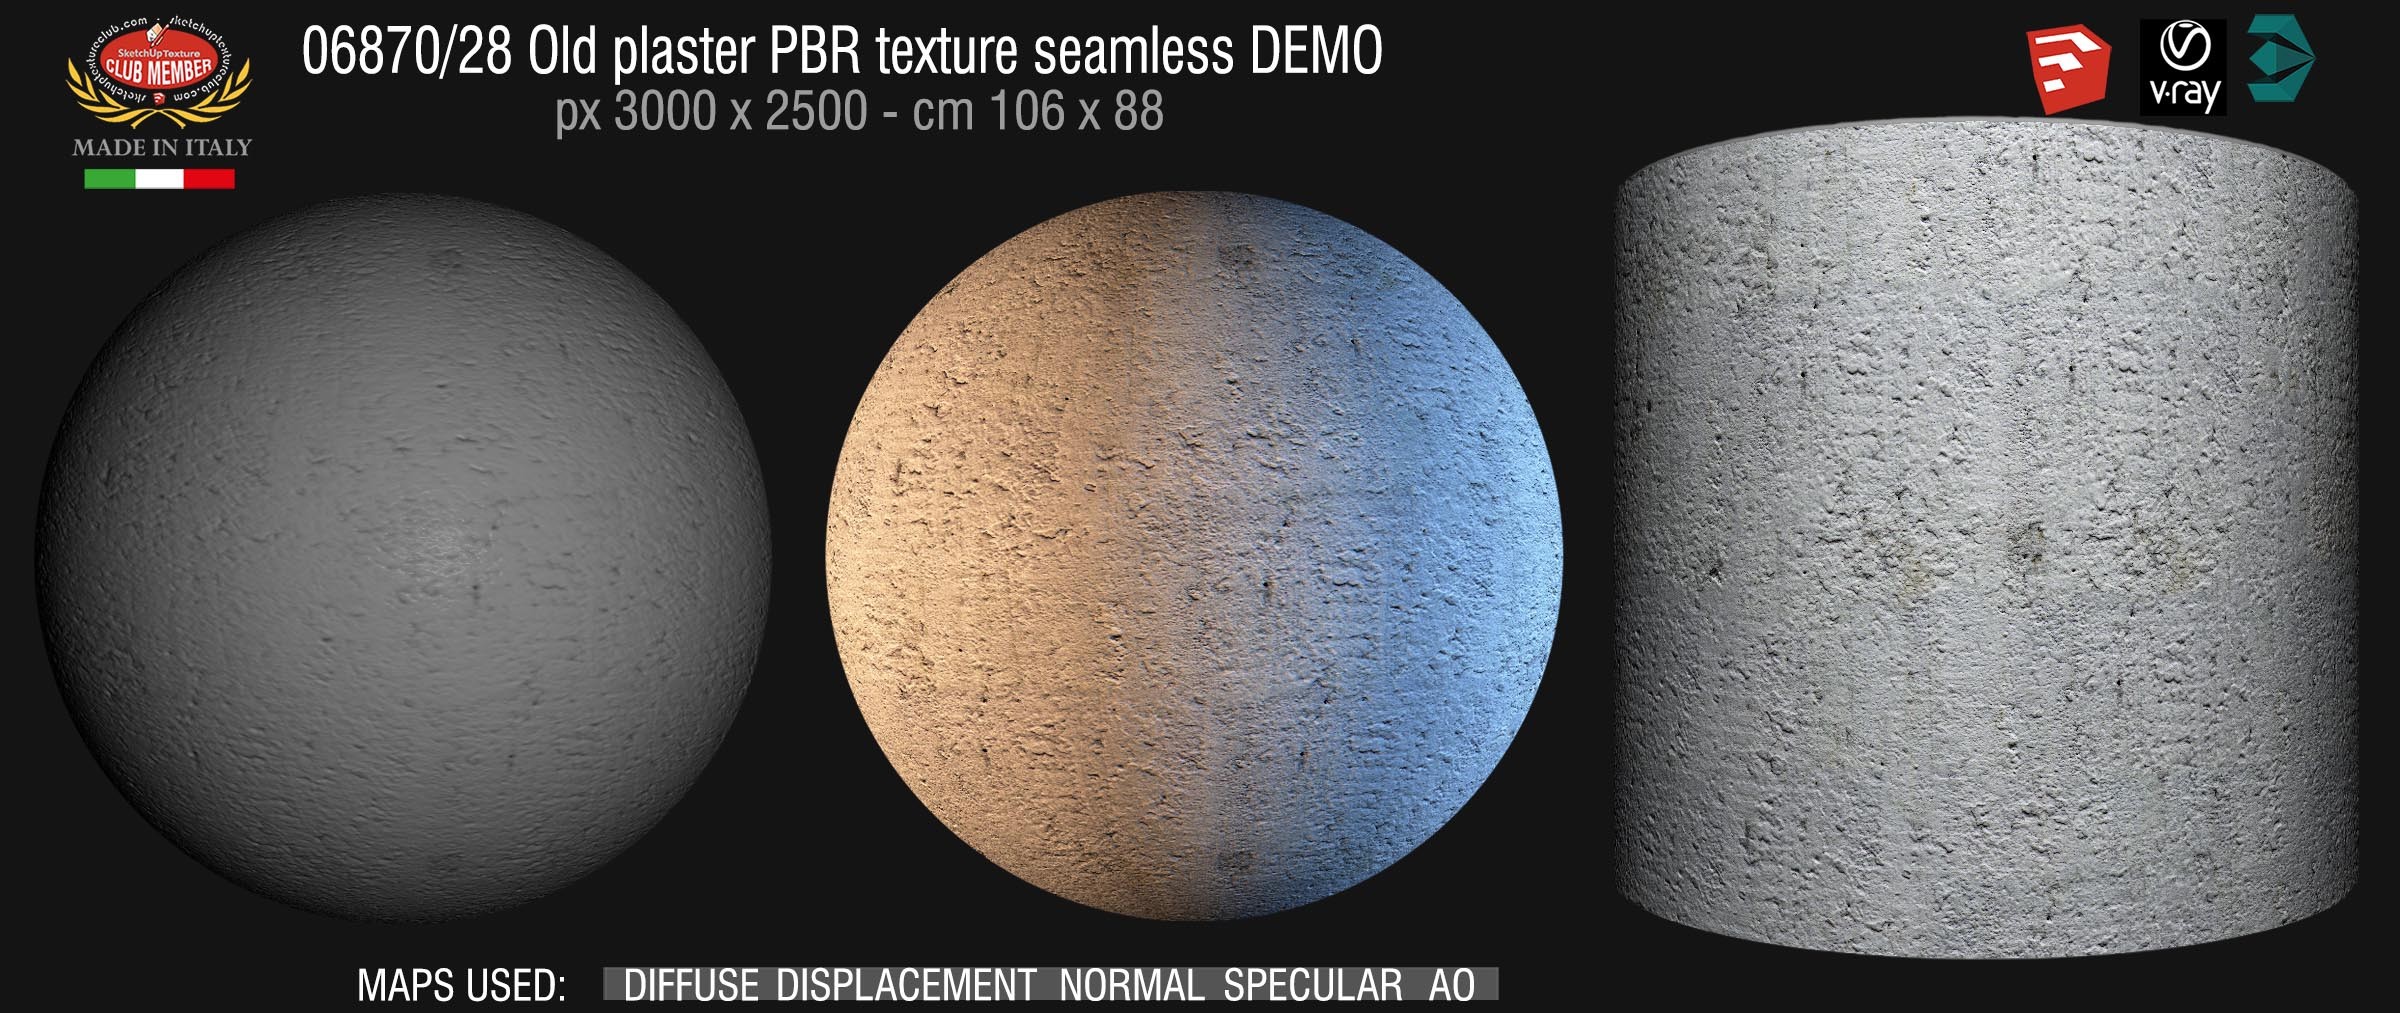 06870_28 Old plaster PBR texture seamless DEMO